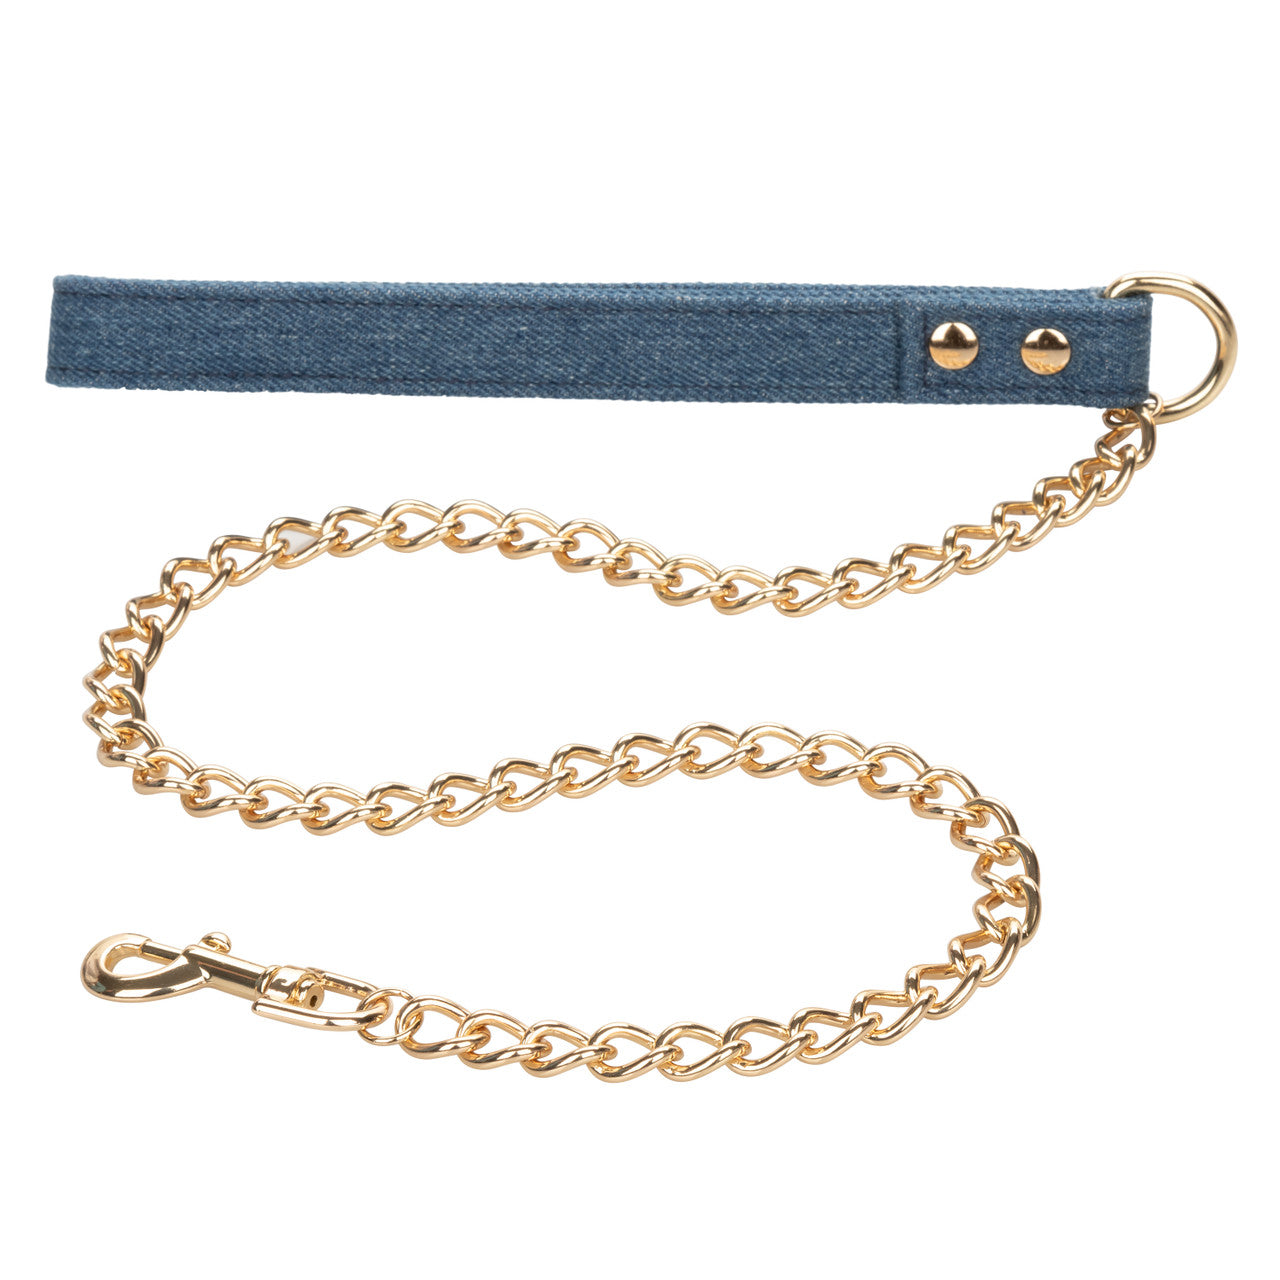 Ride 'em Premium Denim Collection Collar with Leash - Thorn & Feather